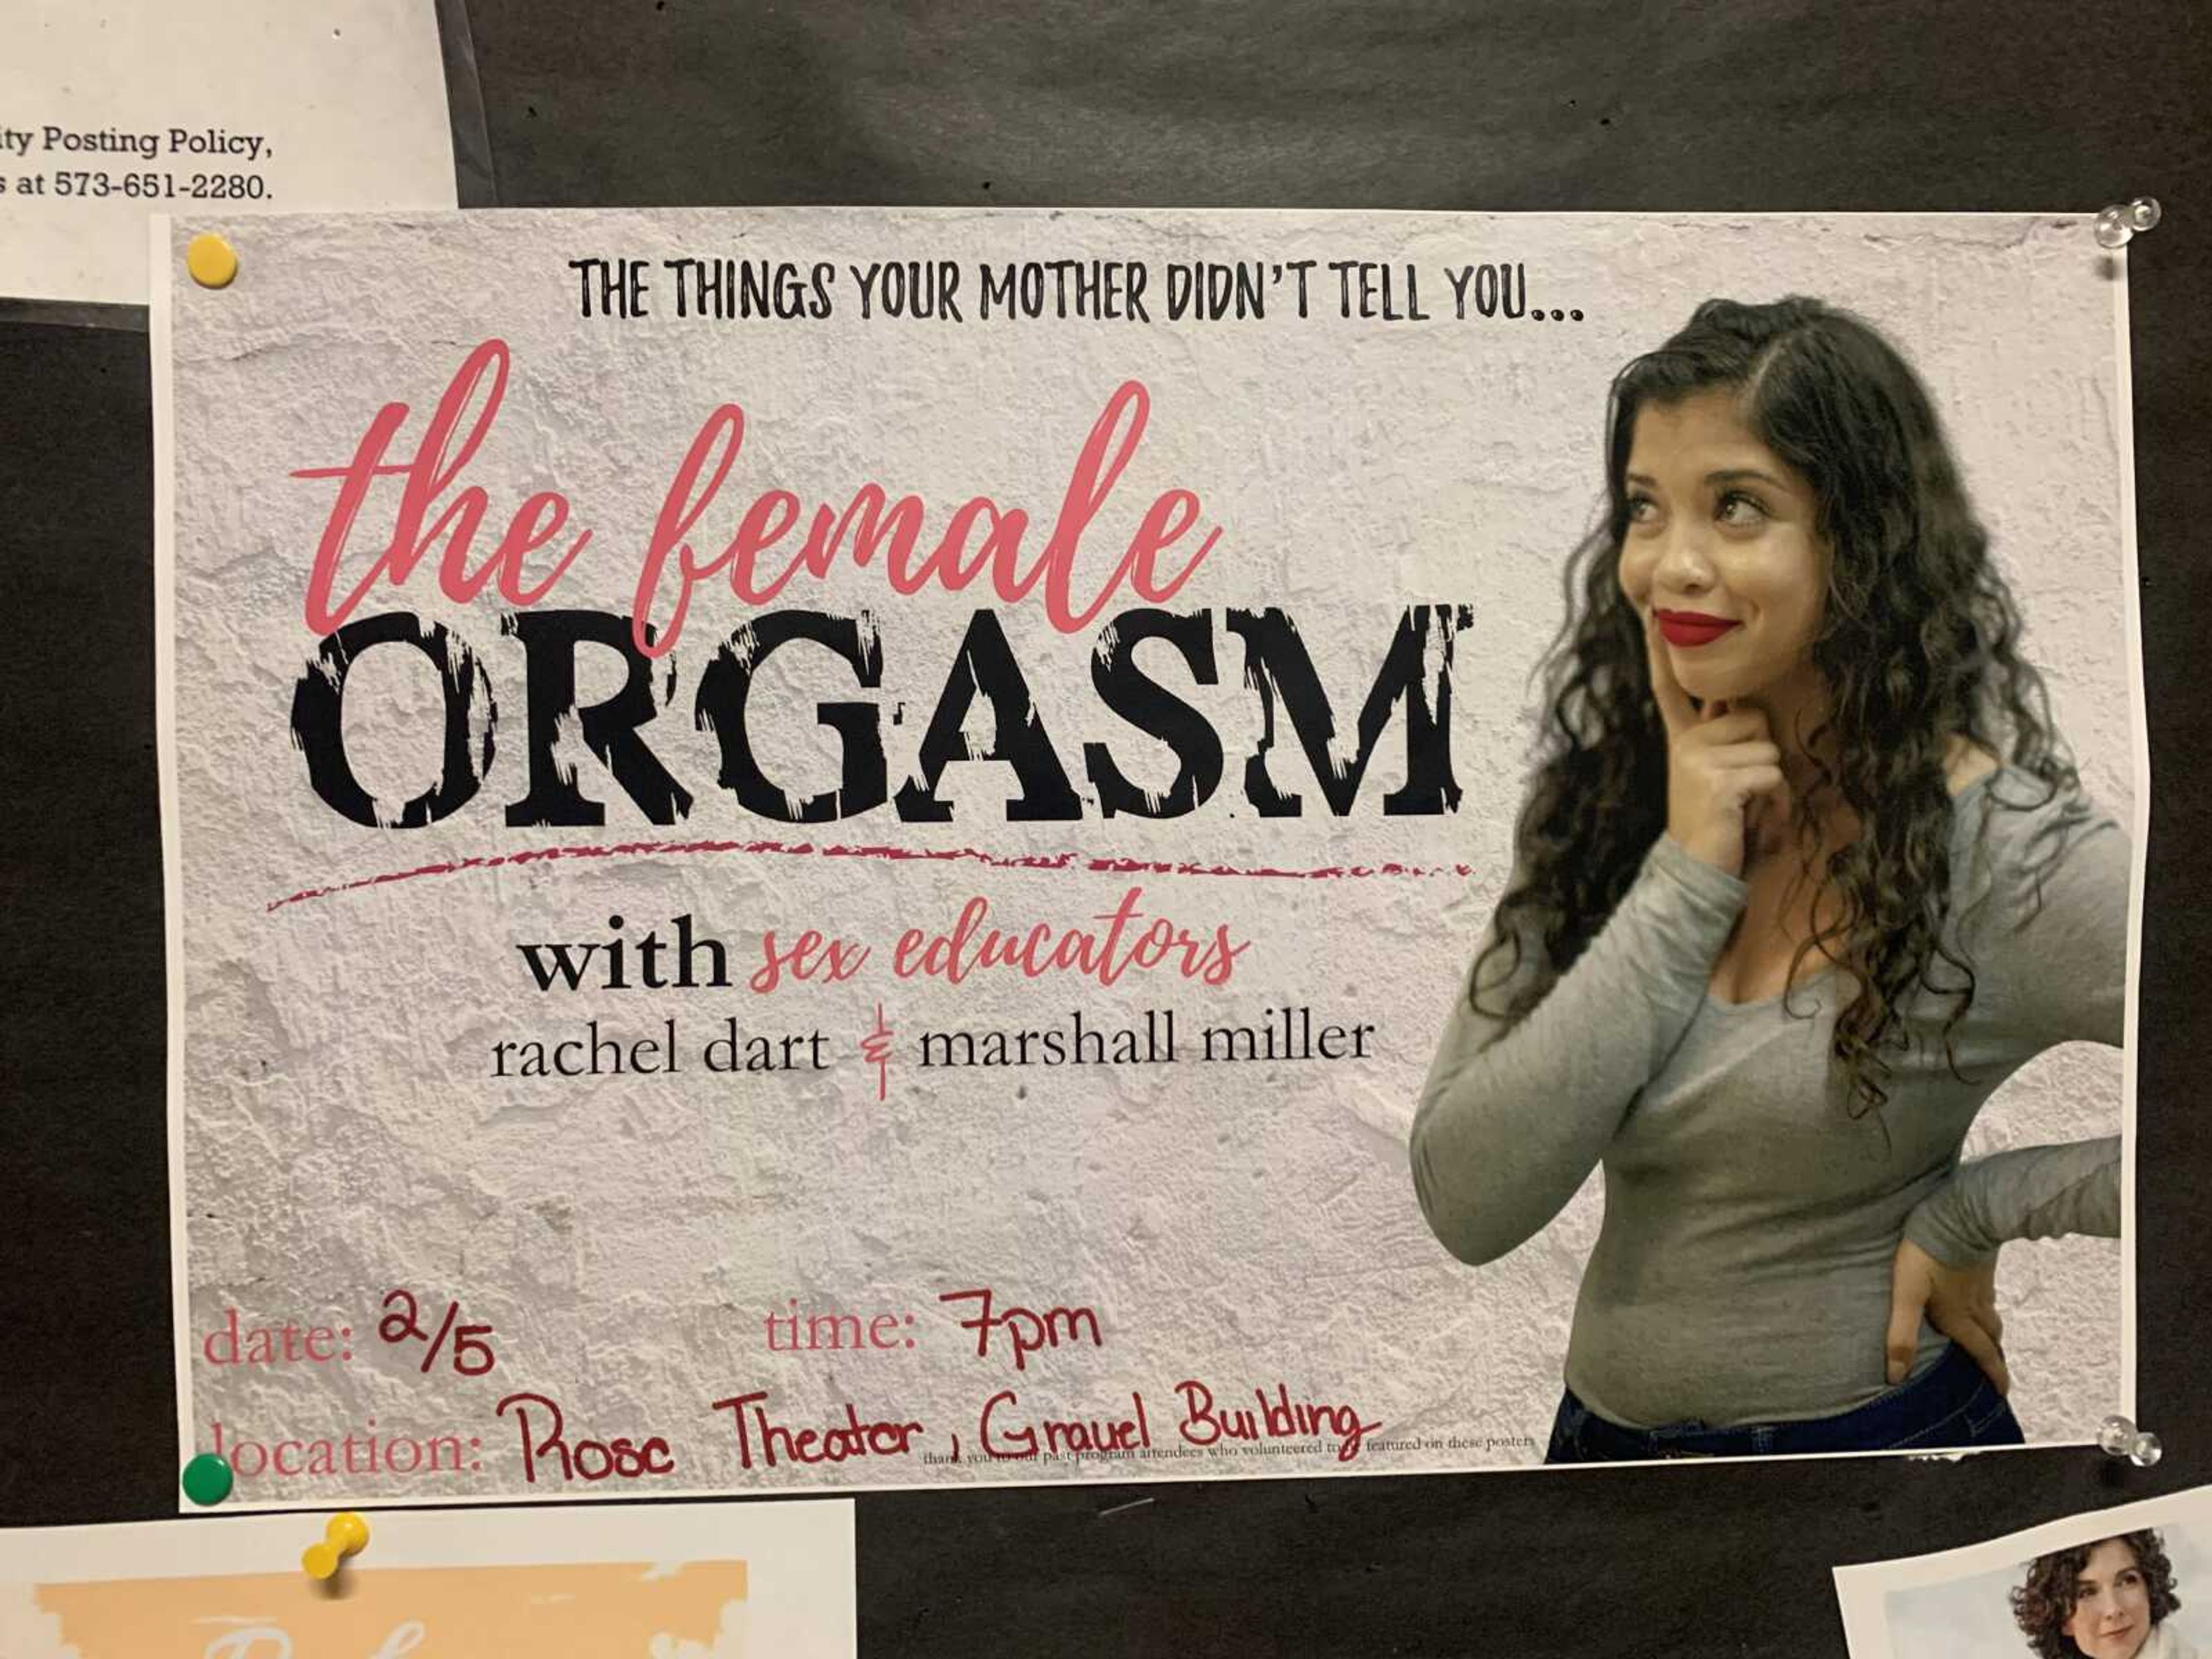 Sex educators will come to SEMO on Wednesday, Feb. 5th and educate students on Orgasms.